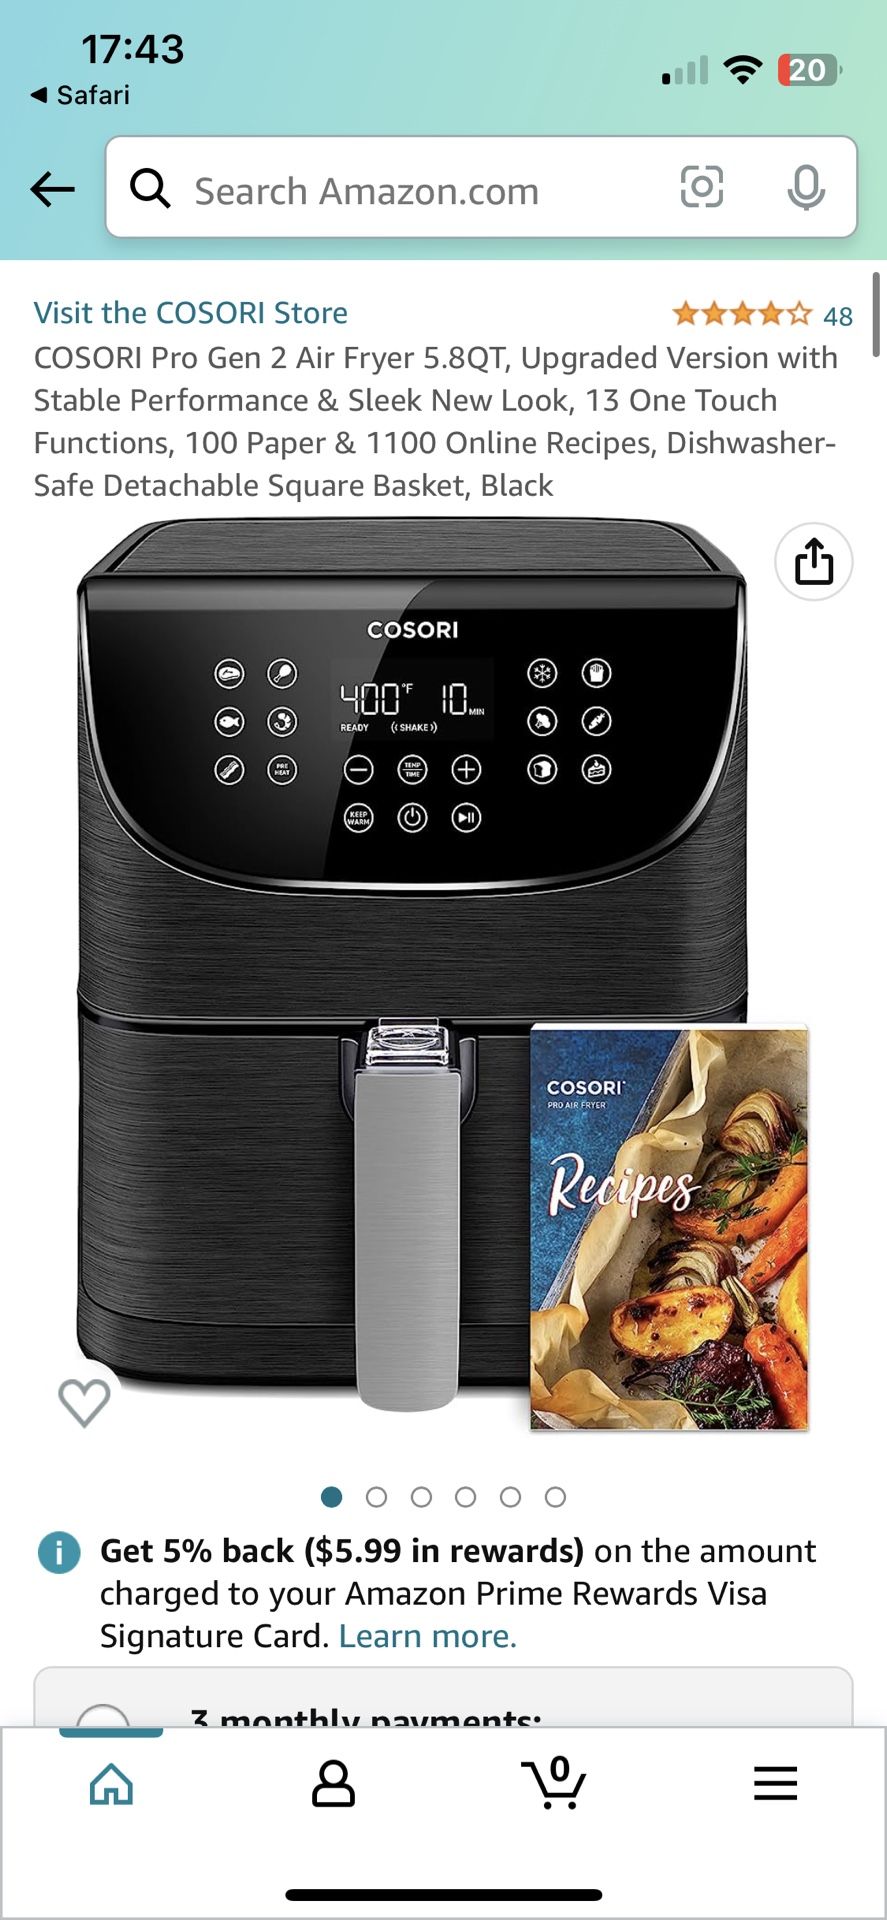 Cosori CP168-AF Pro Gen 2 5.8 Quart Air Fryer W 13 One Touch Functions Black